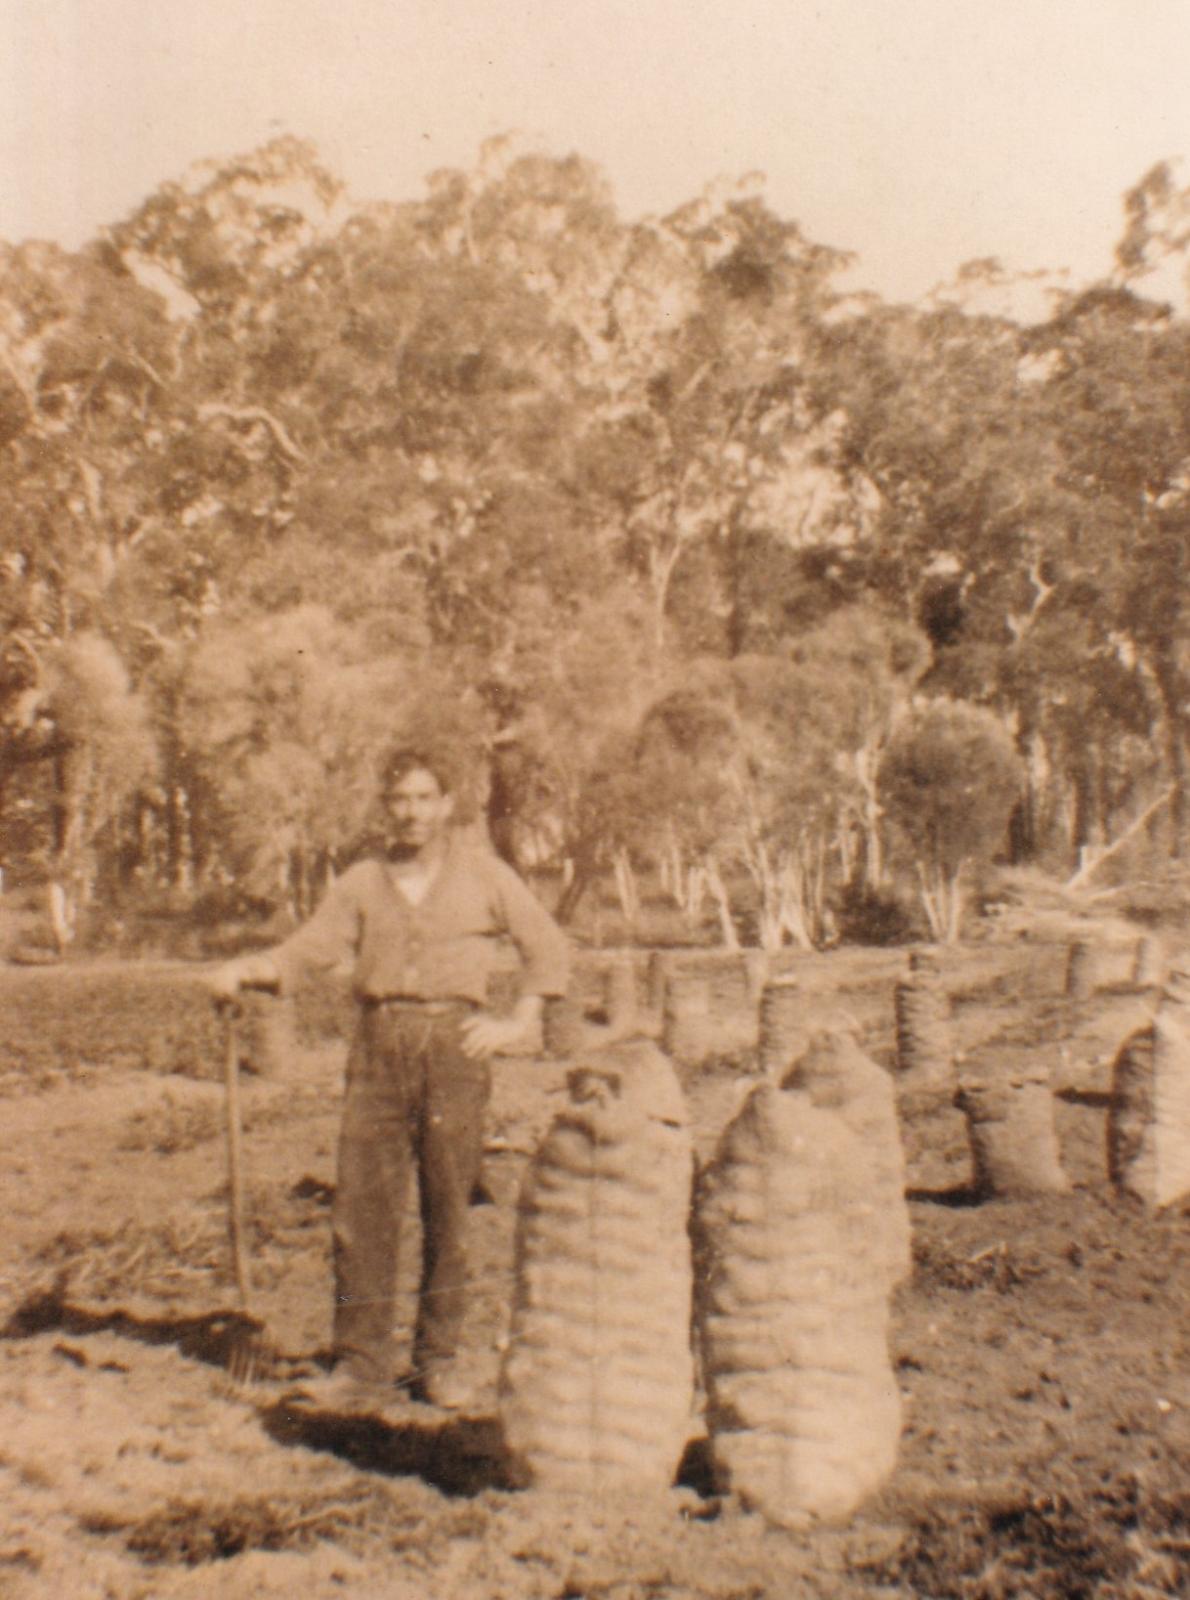 A young Charles Sutton in his potato field